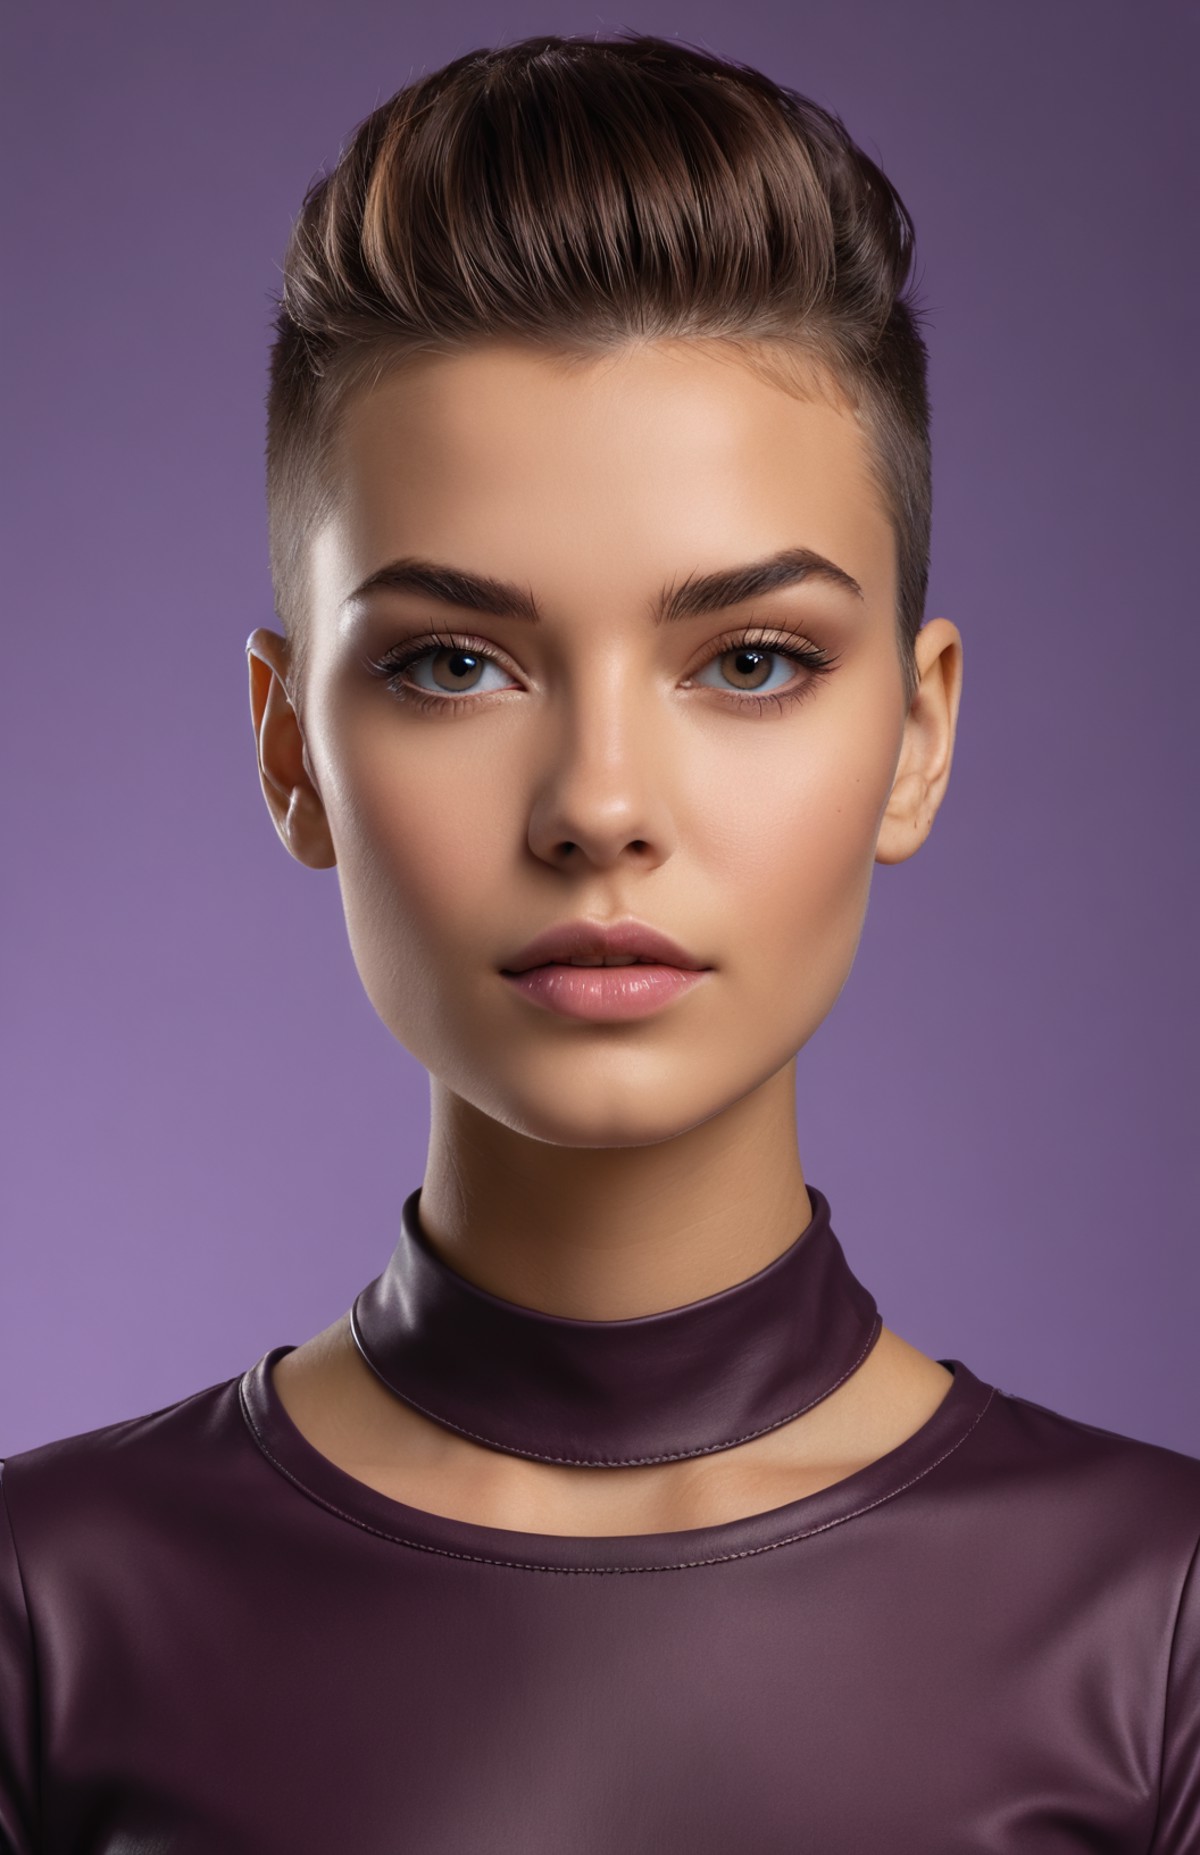 a woman, she is from Hungary, 18 years old, mohawk, shows interest, makeup, wearing Mahogany brown T-shirt with neck pleat...